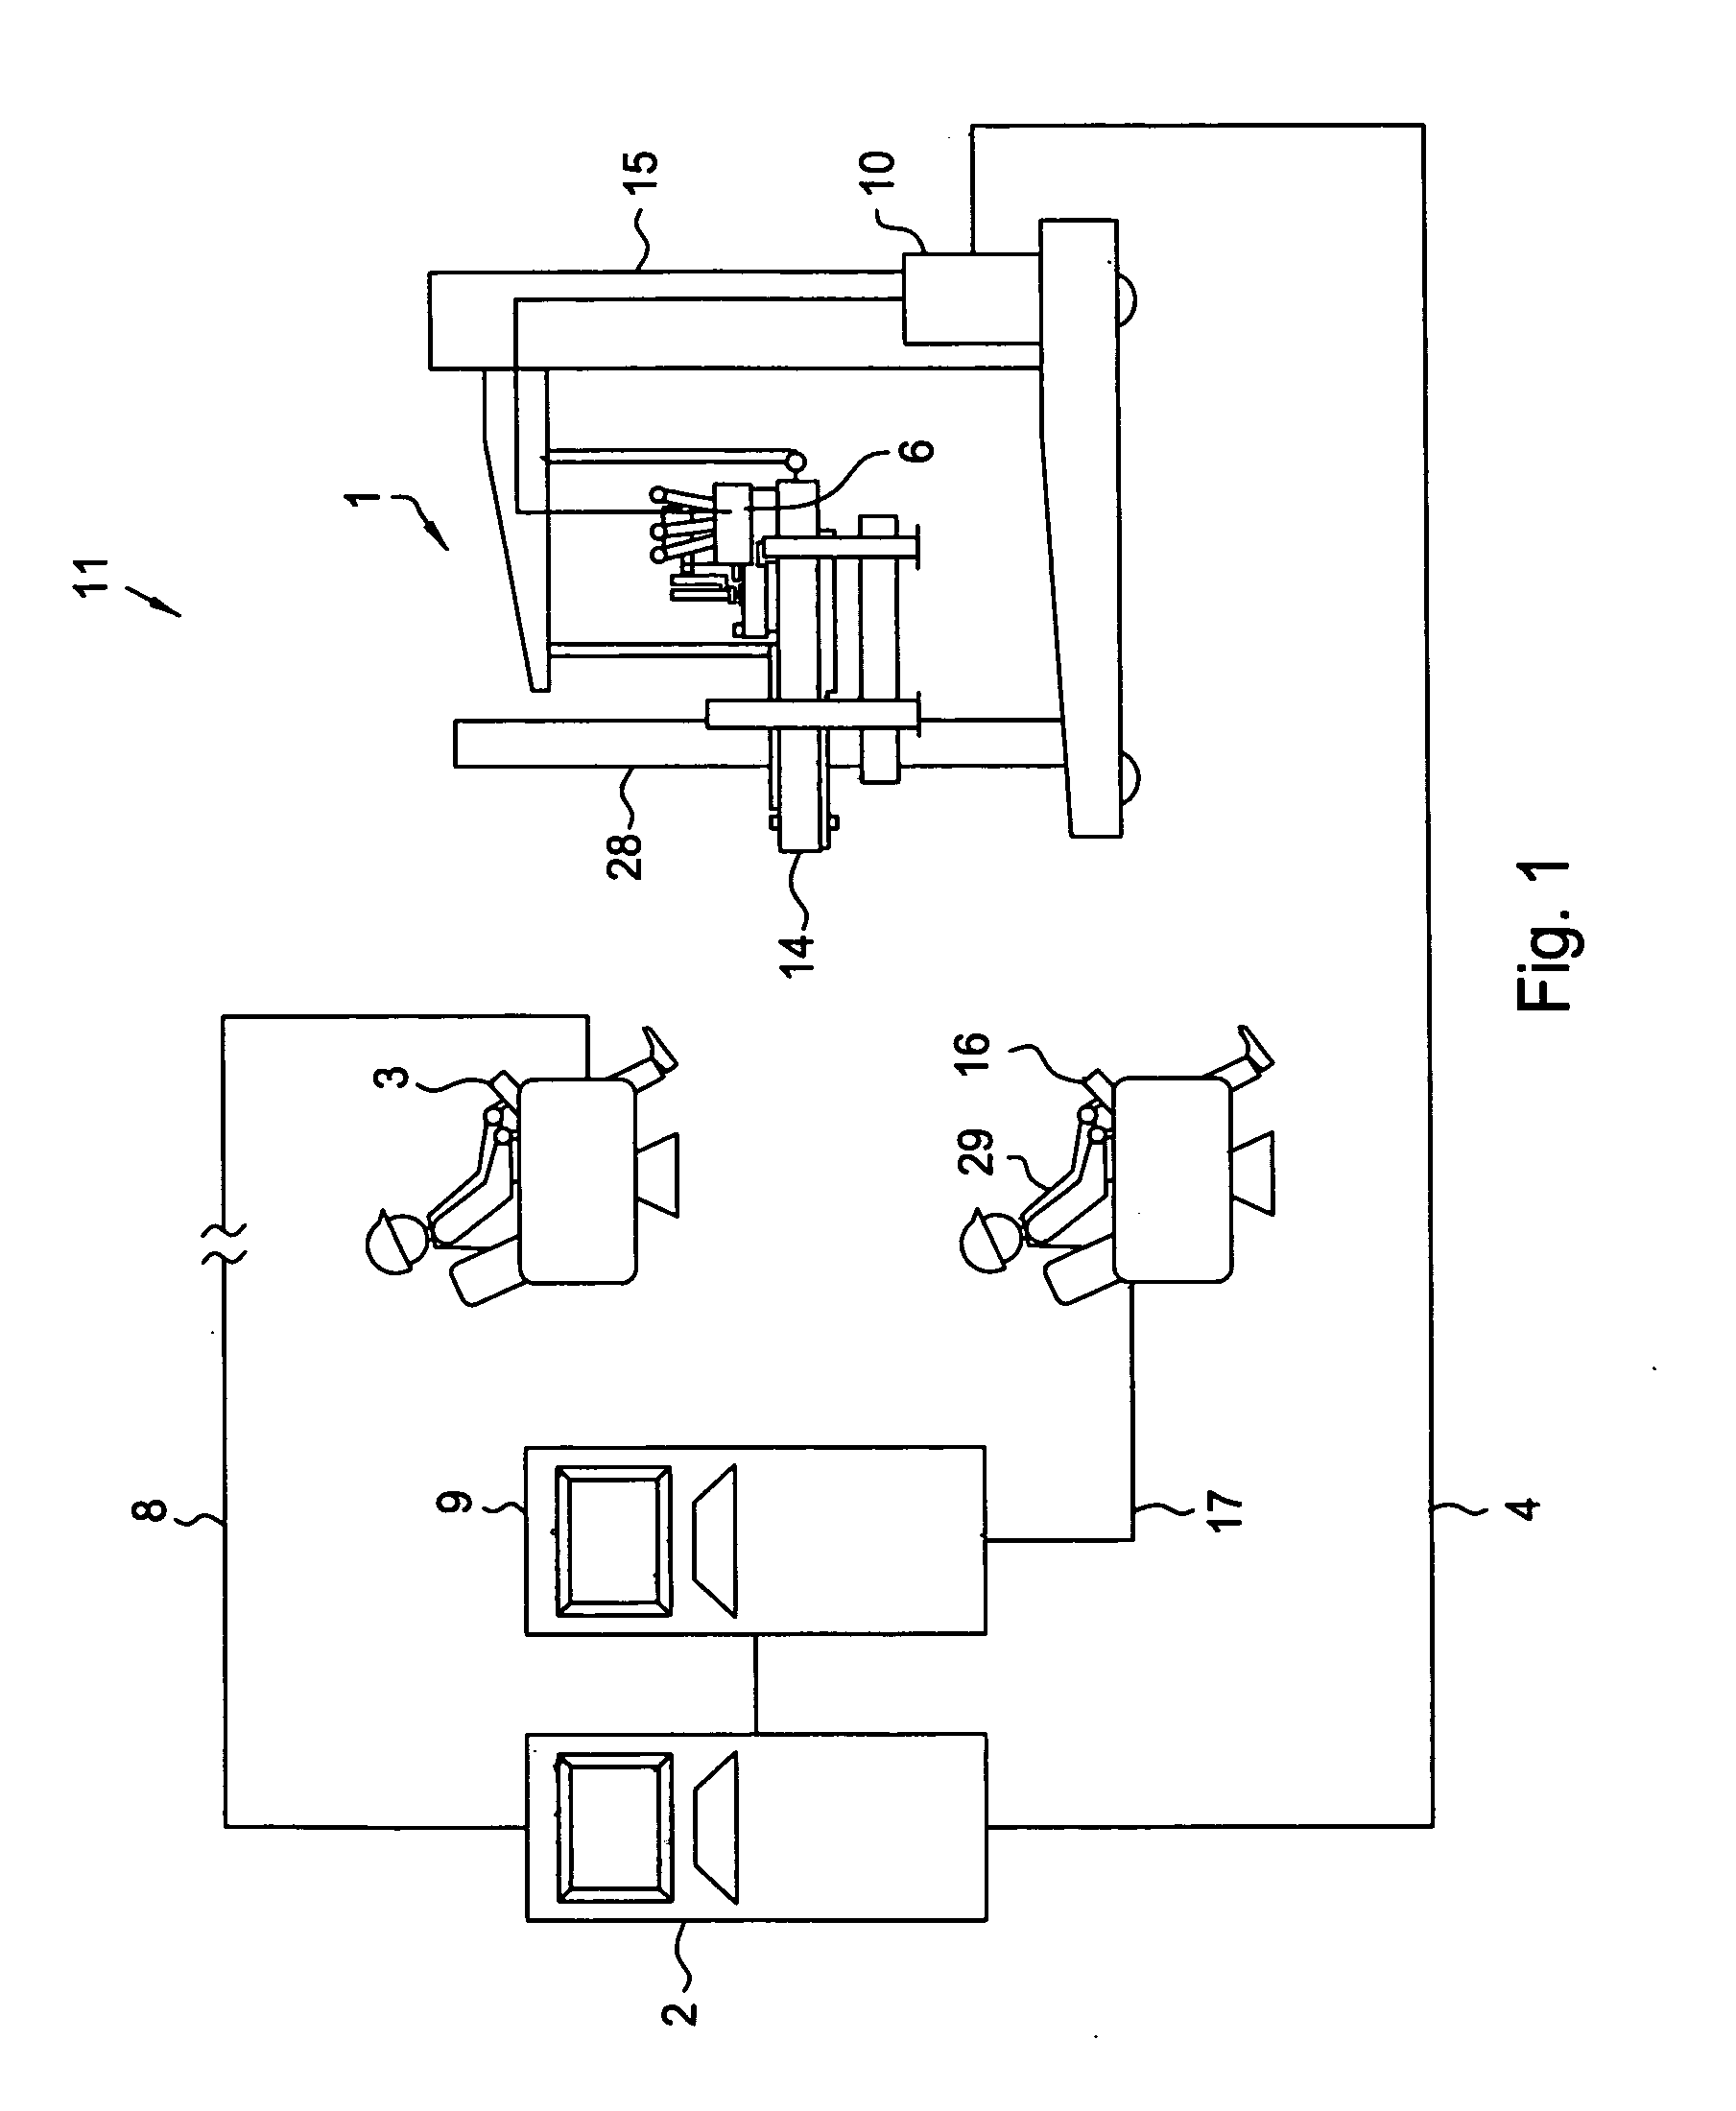 Method and apparatus for controlling wellbore equipment